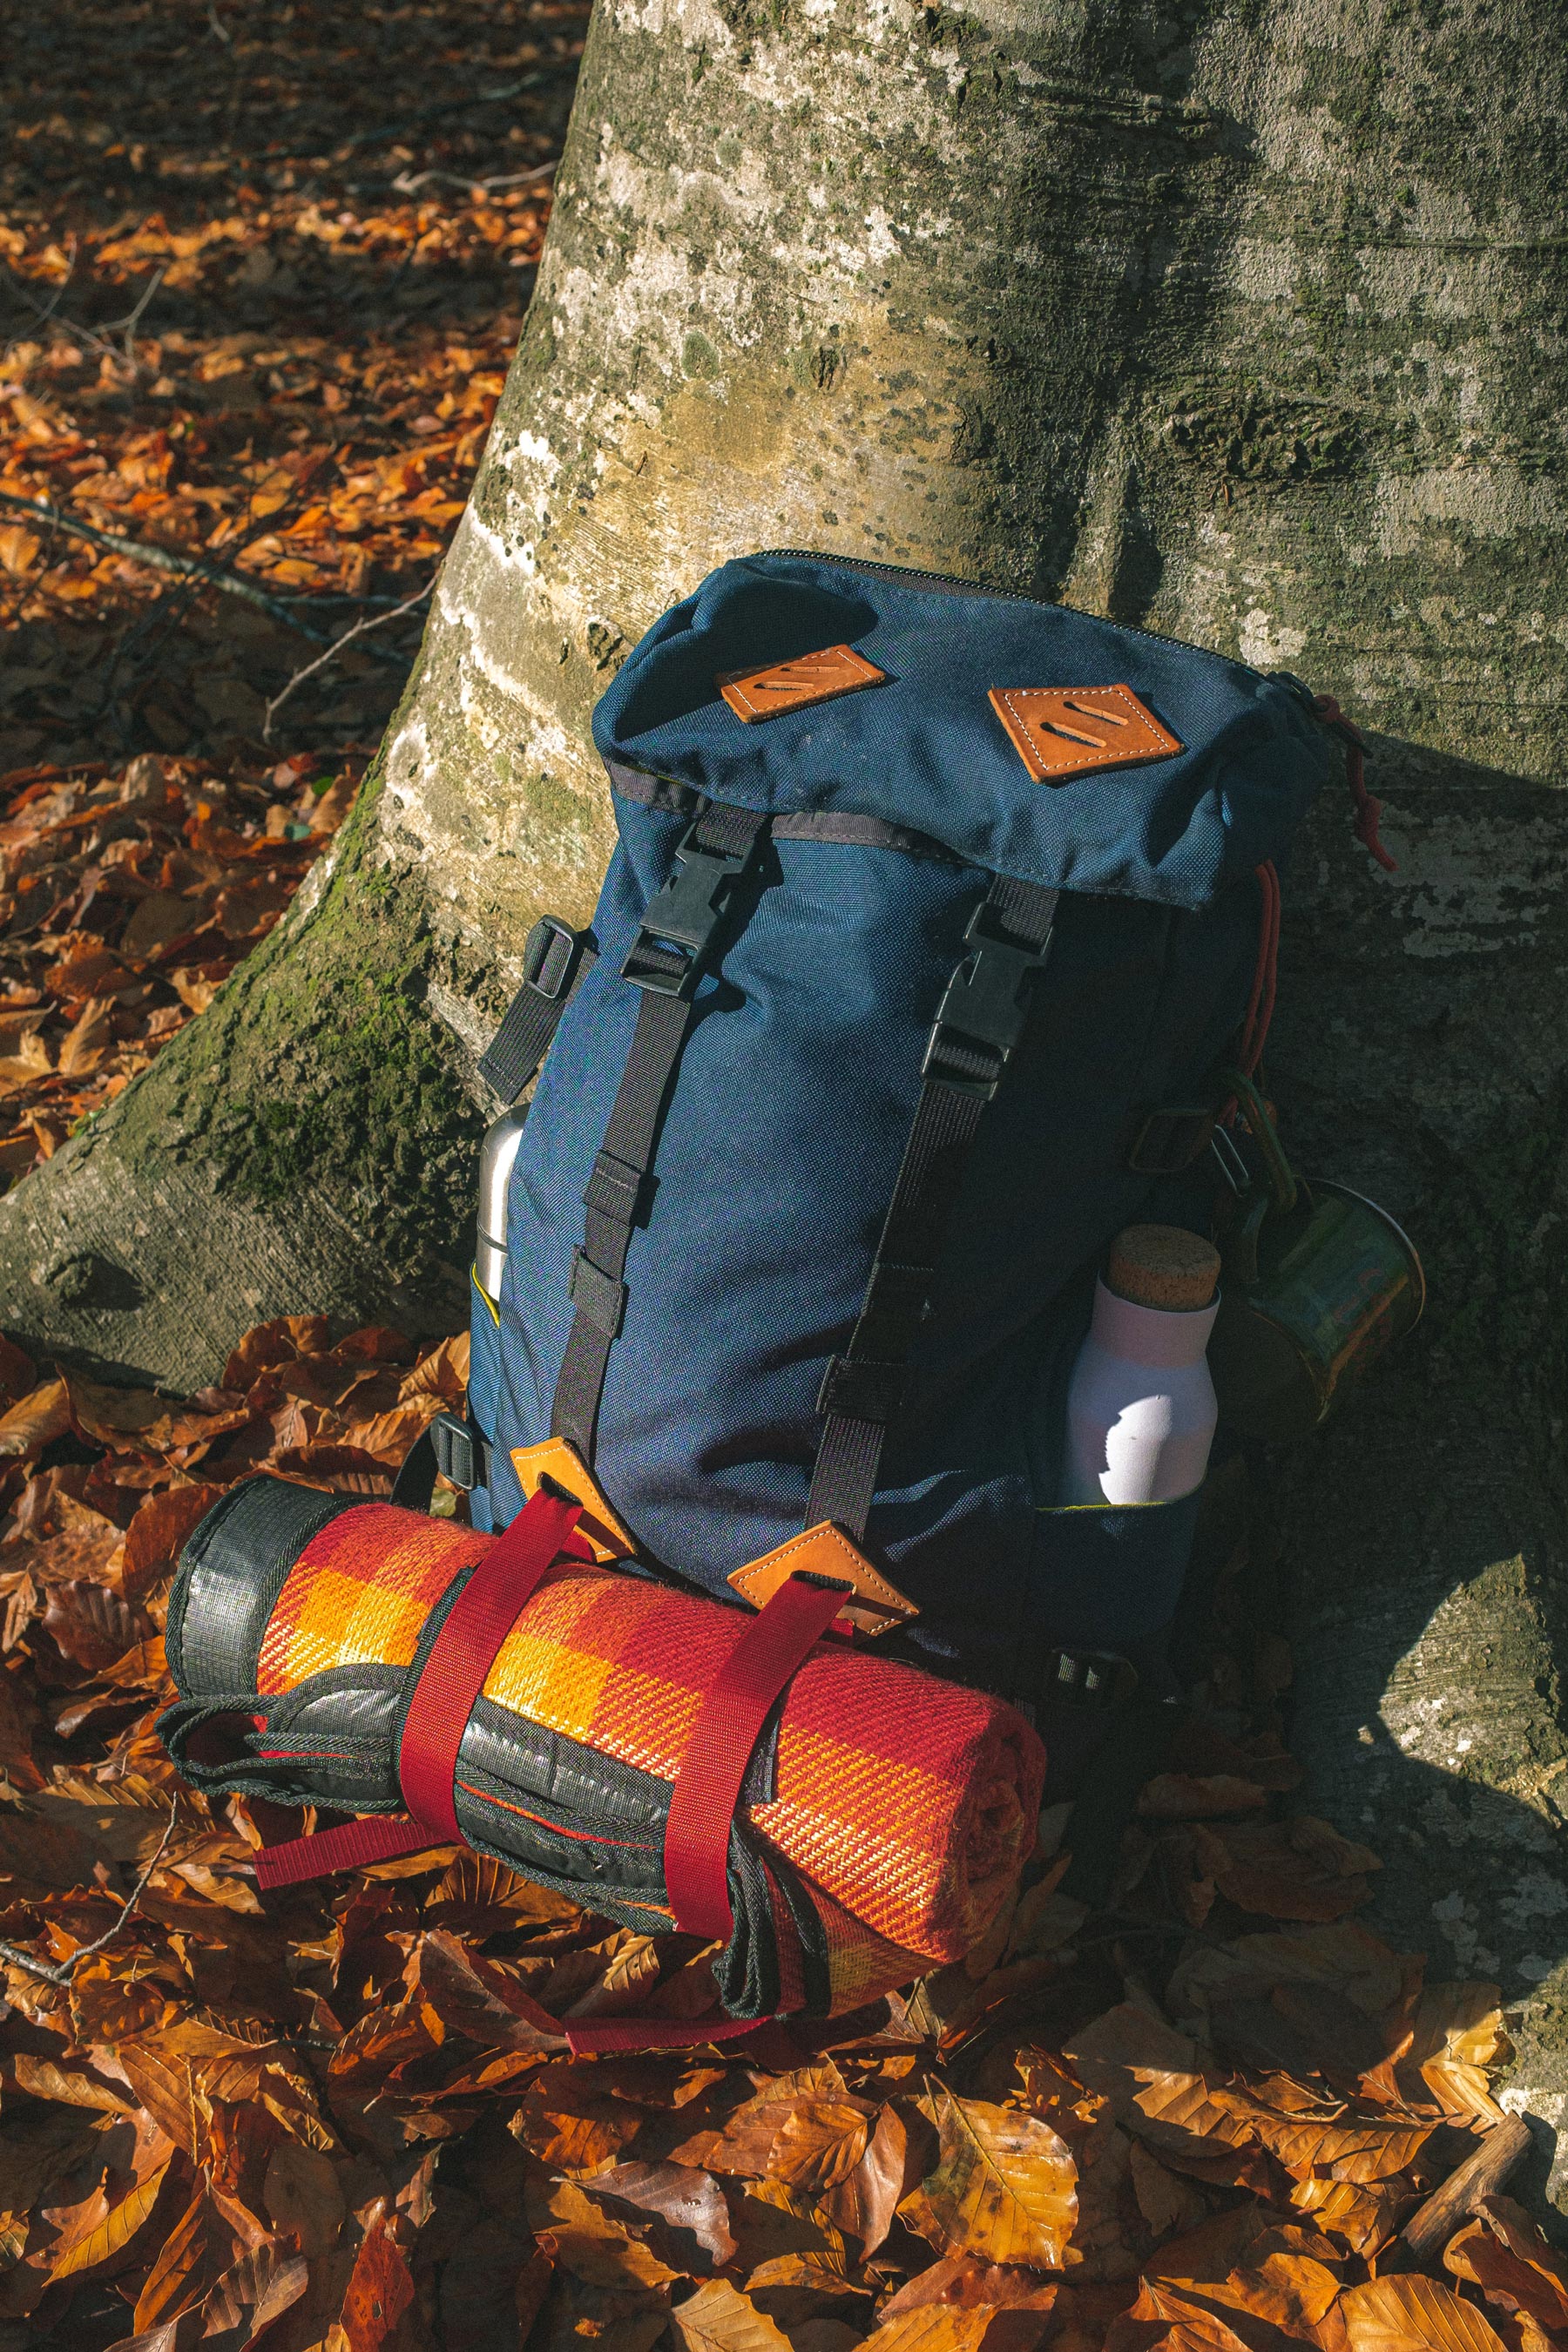 Hiker's day pack leaned at the base of a tree surrounded by orange leaves.